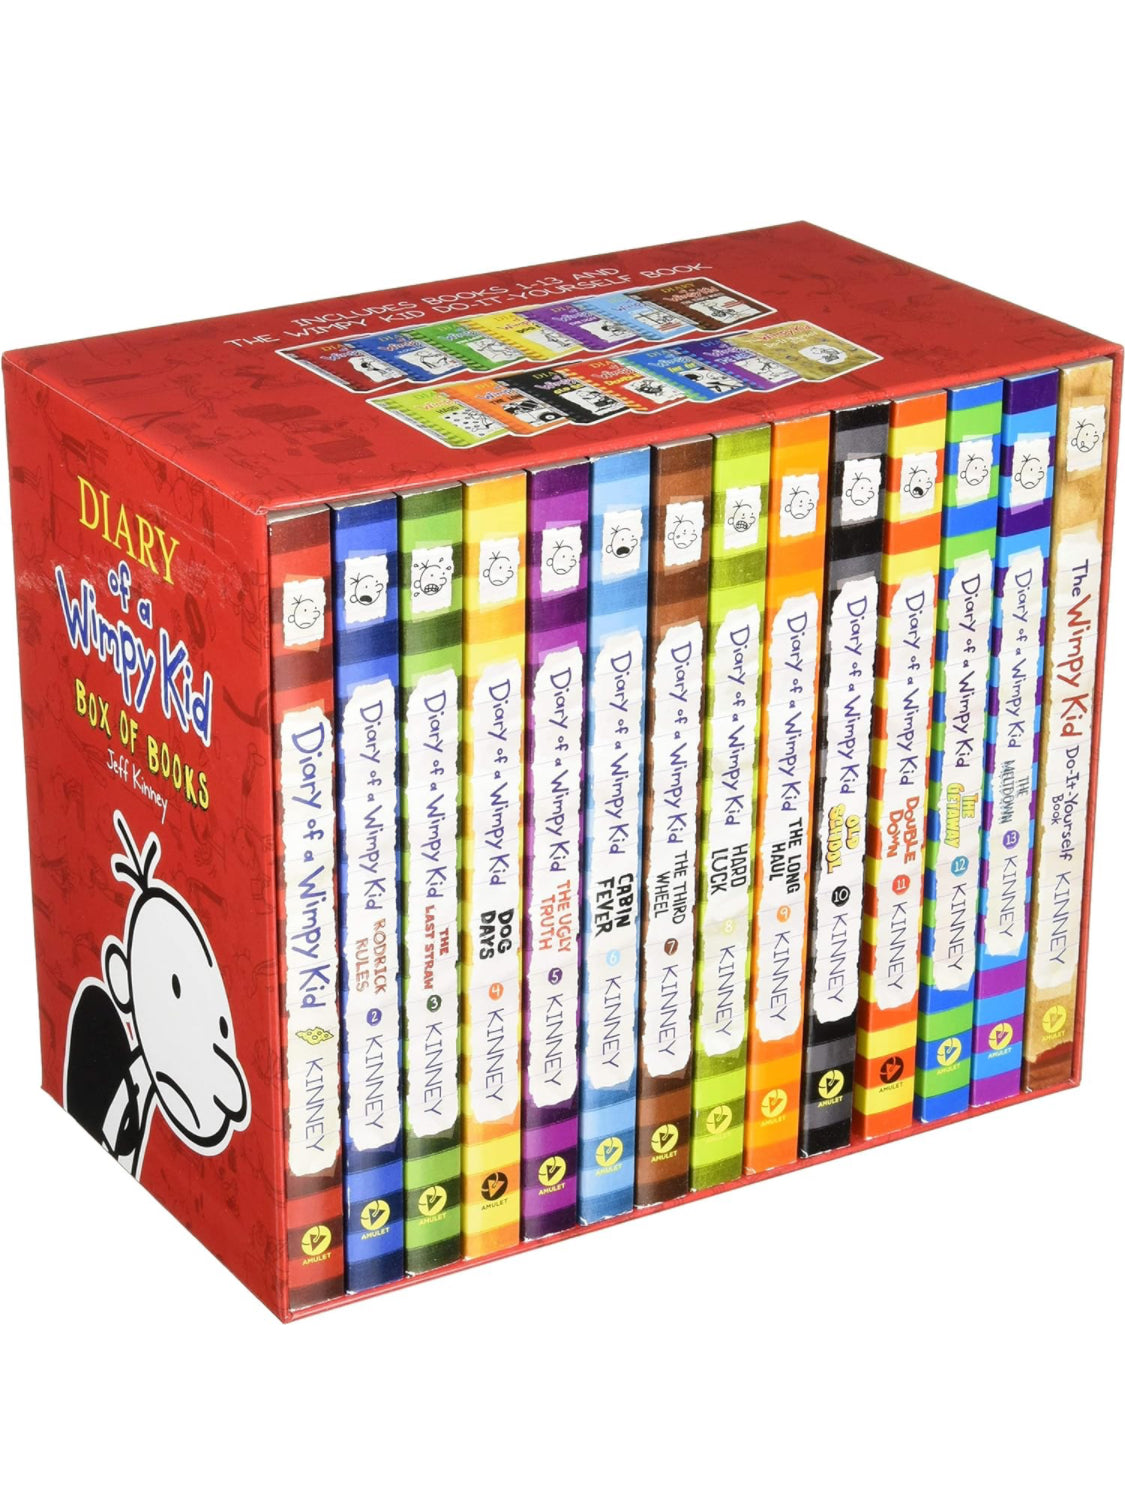 Diary Of A Wimpy Kid Bookset(14 Books)